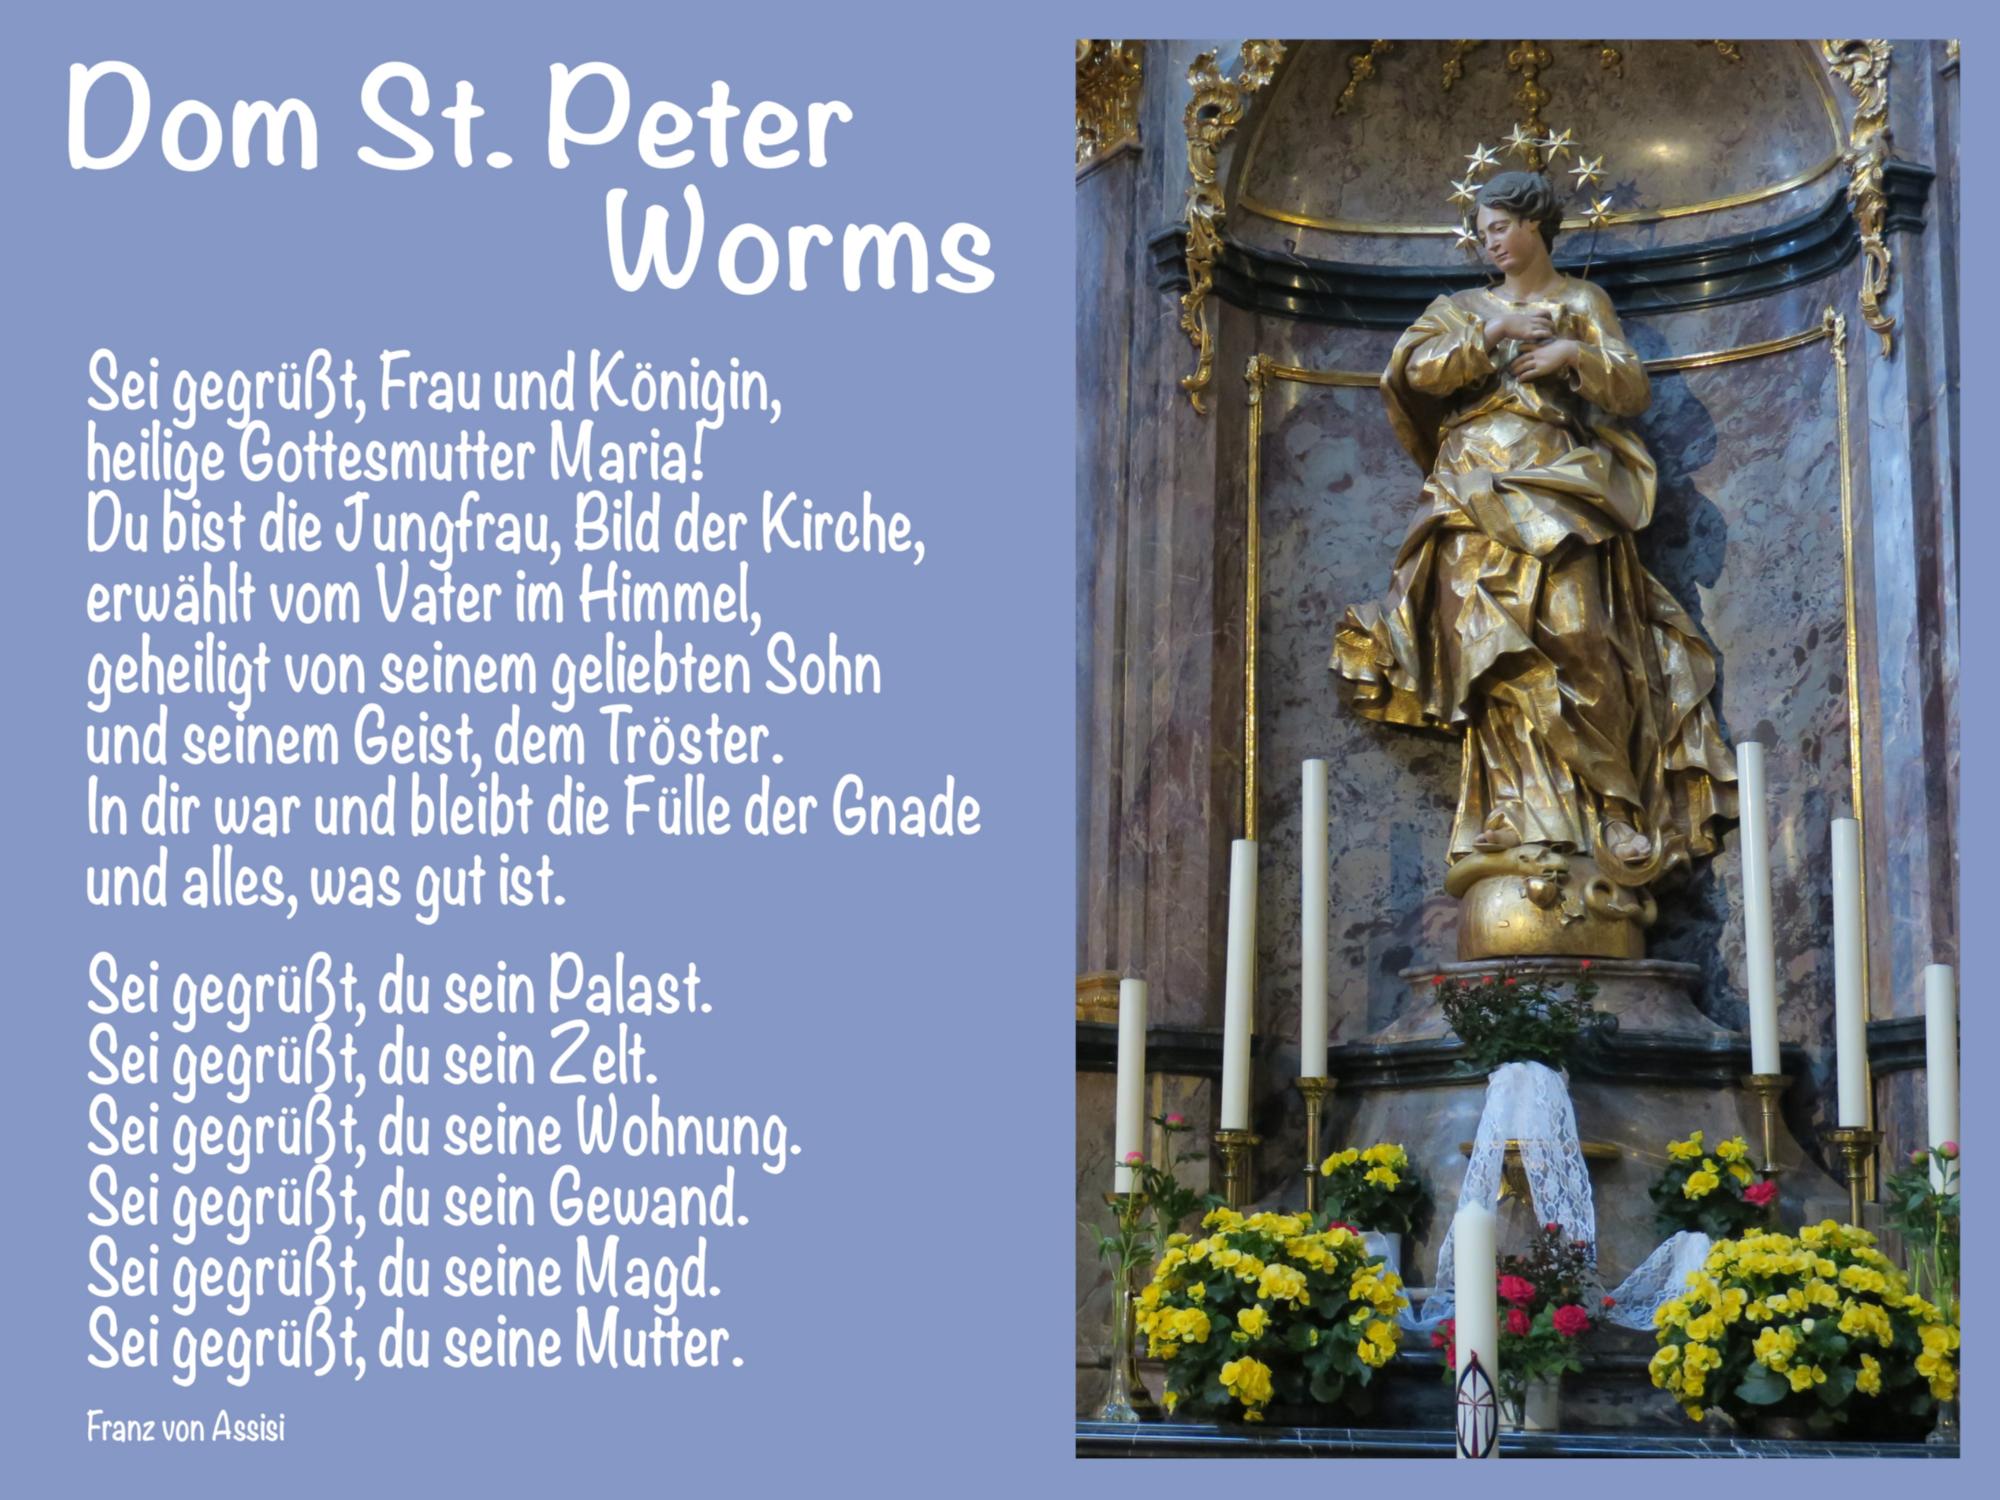 Dom St. Peter Worms